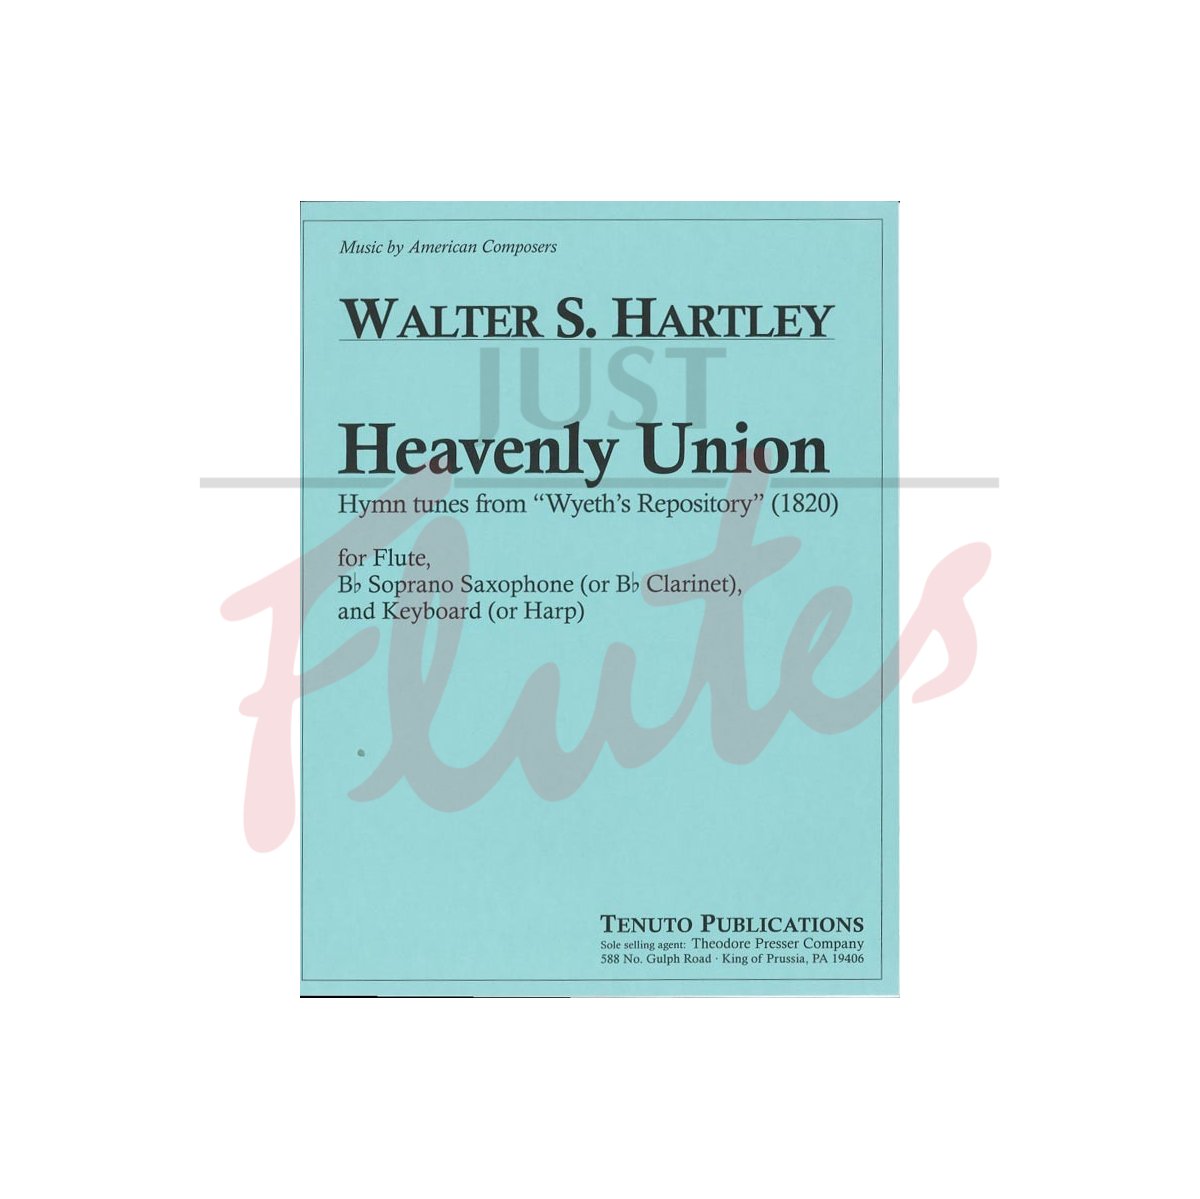 Heavenly Union- Hymn Tunes from 'Wyeth's Repository' for Flute, Soprano Sax and Keyboard